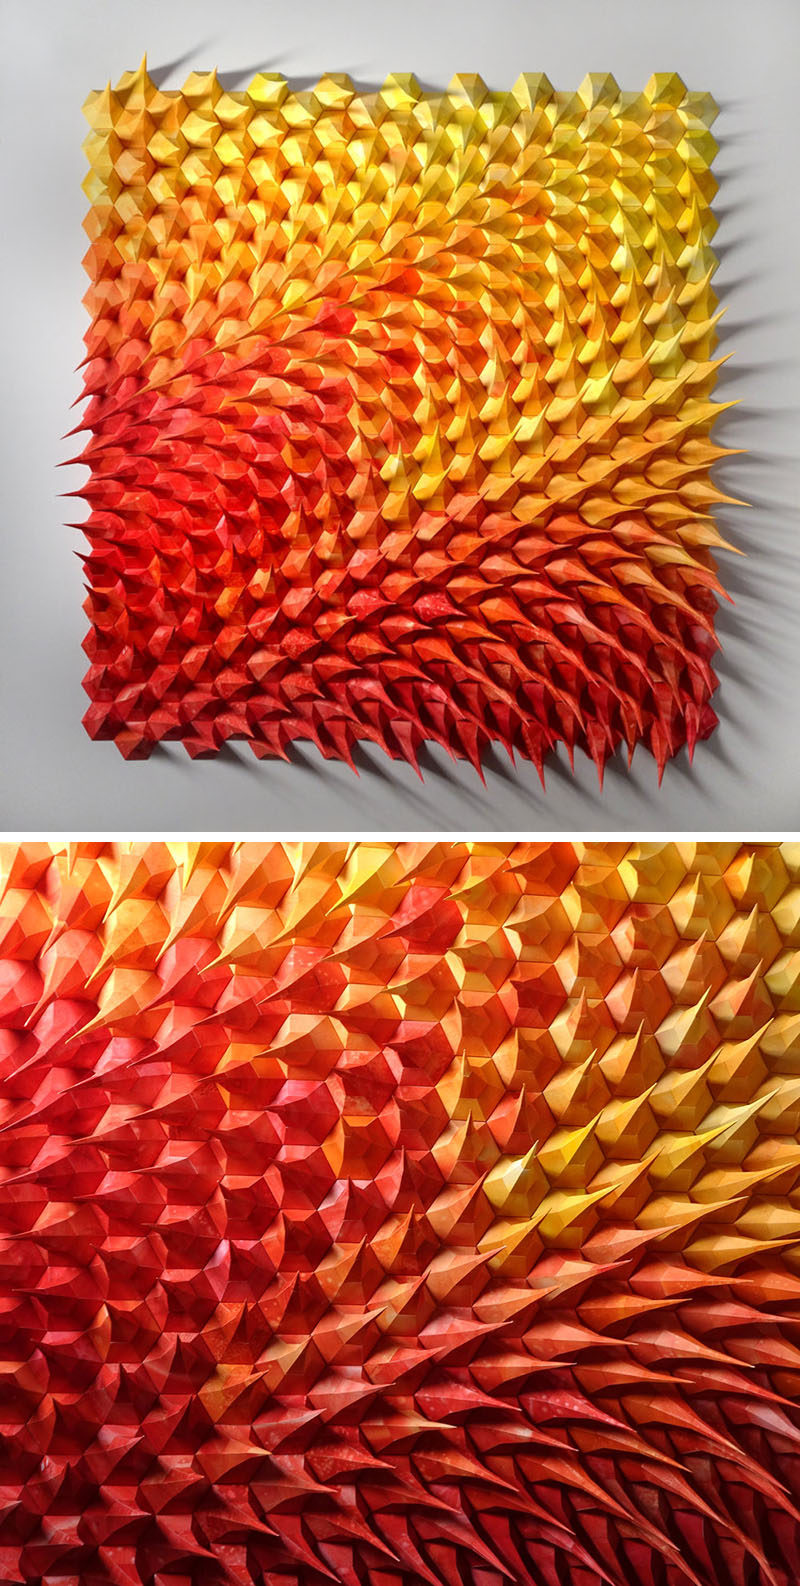 American paper engineer and artist Matt Shlian, has created a collection of sculptures where he uses paper to form artwork that almost look like they're moving. #Art #Sculpture